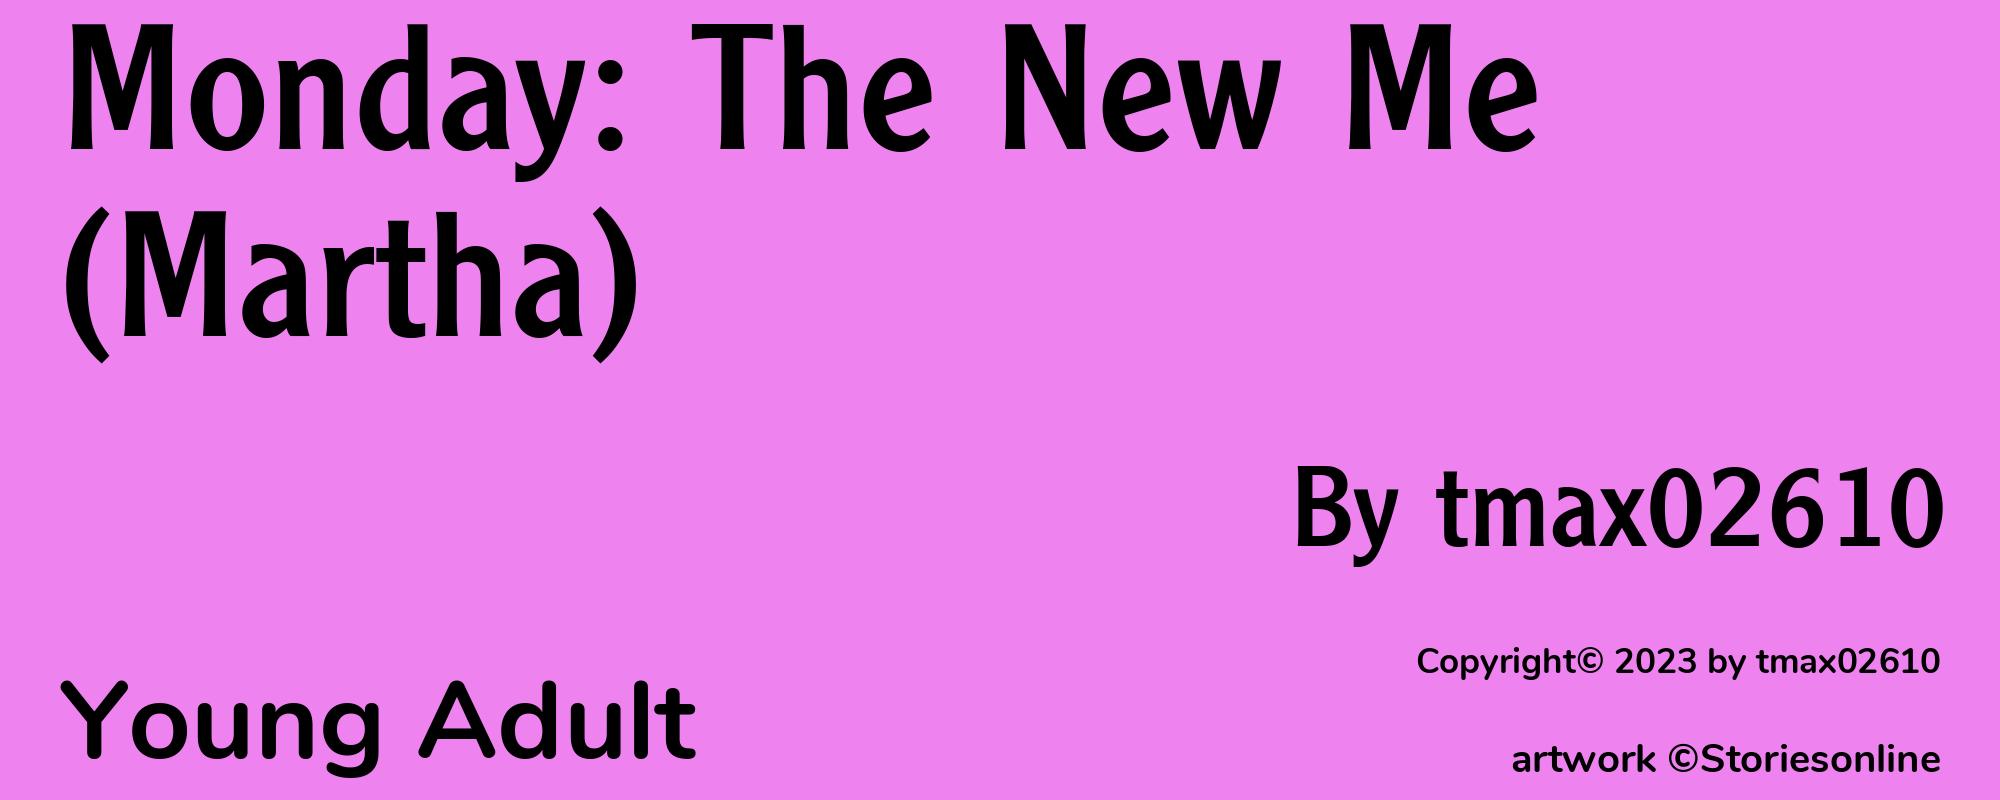 Monday: The New Me (Martha) - Cover